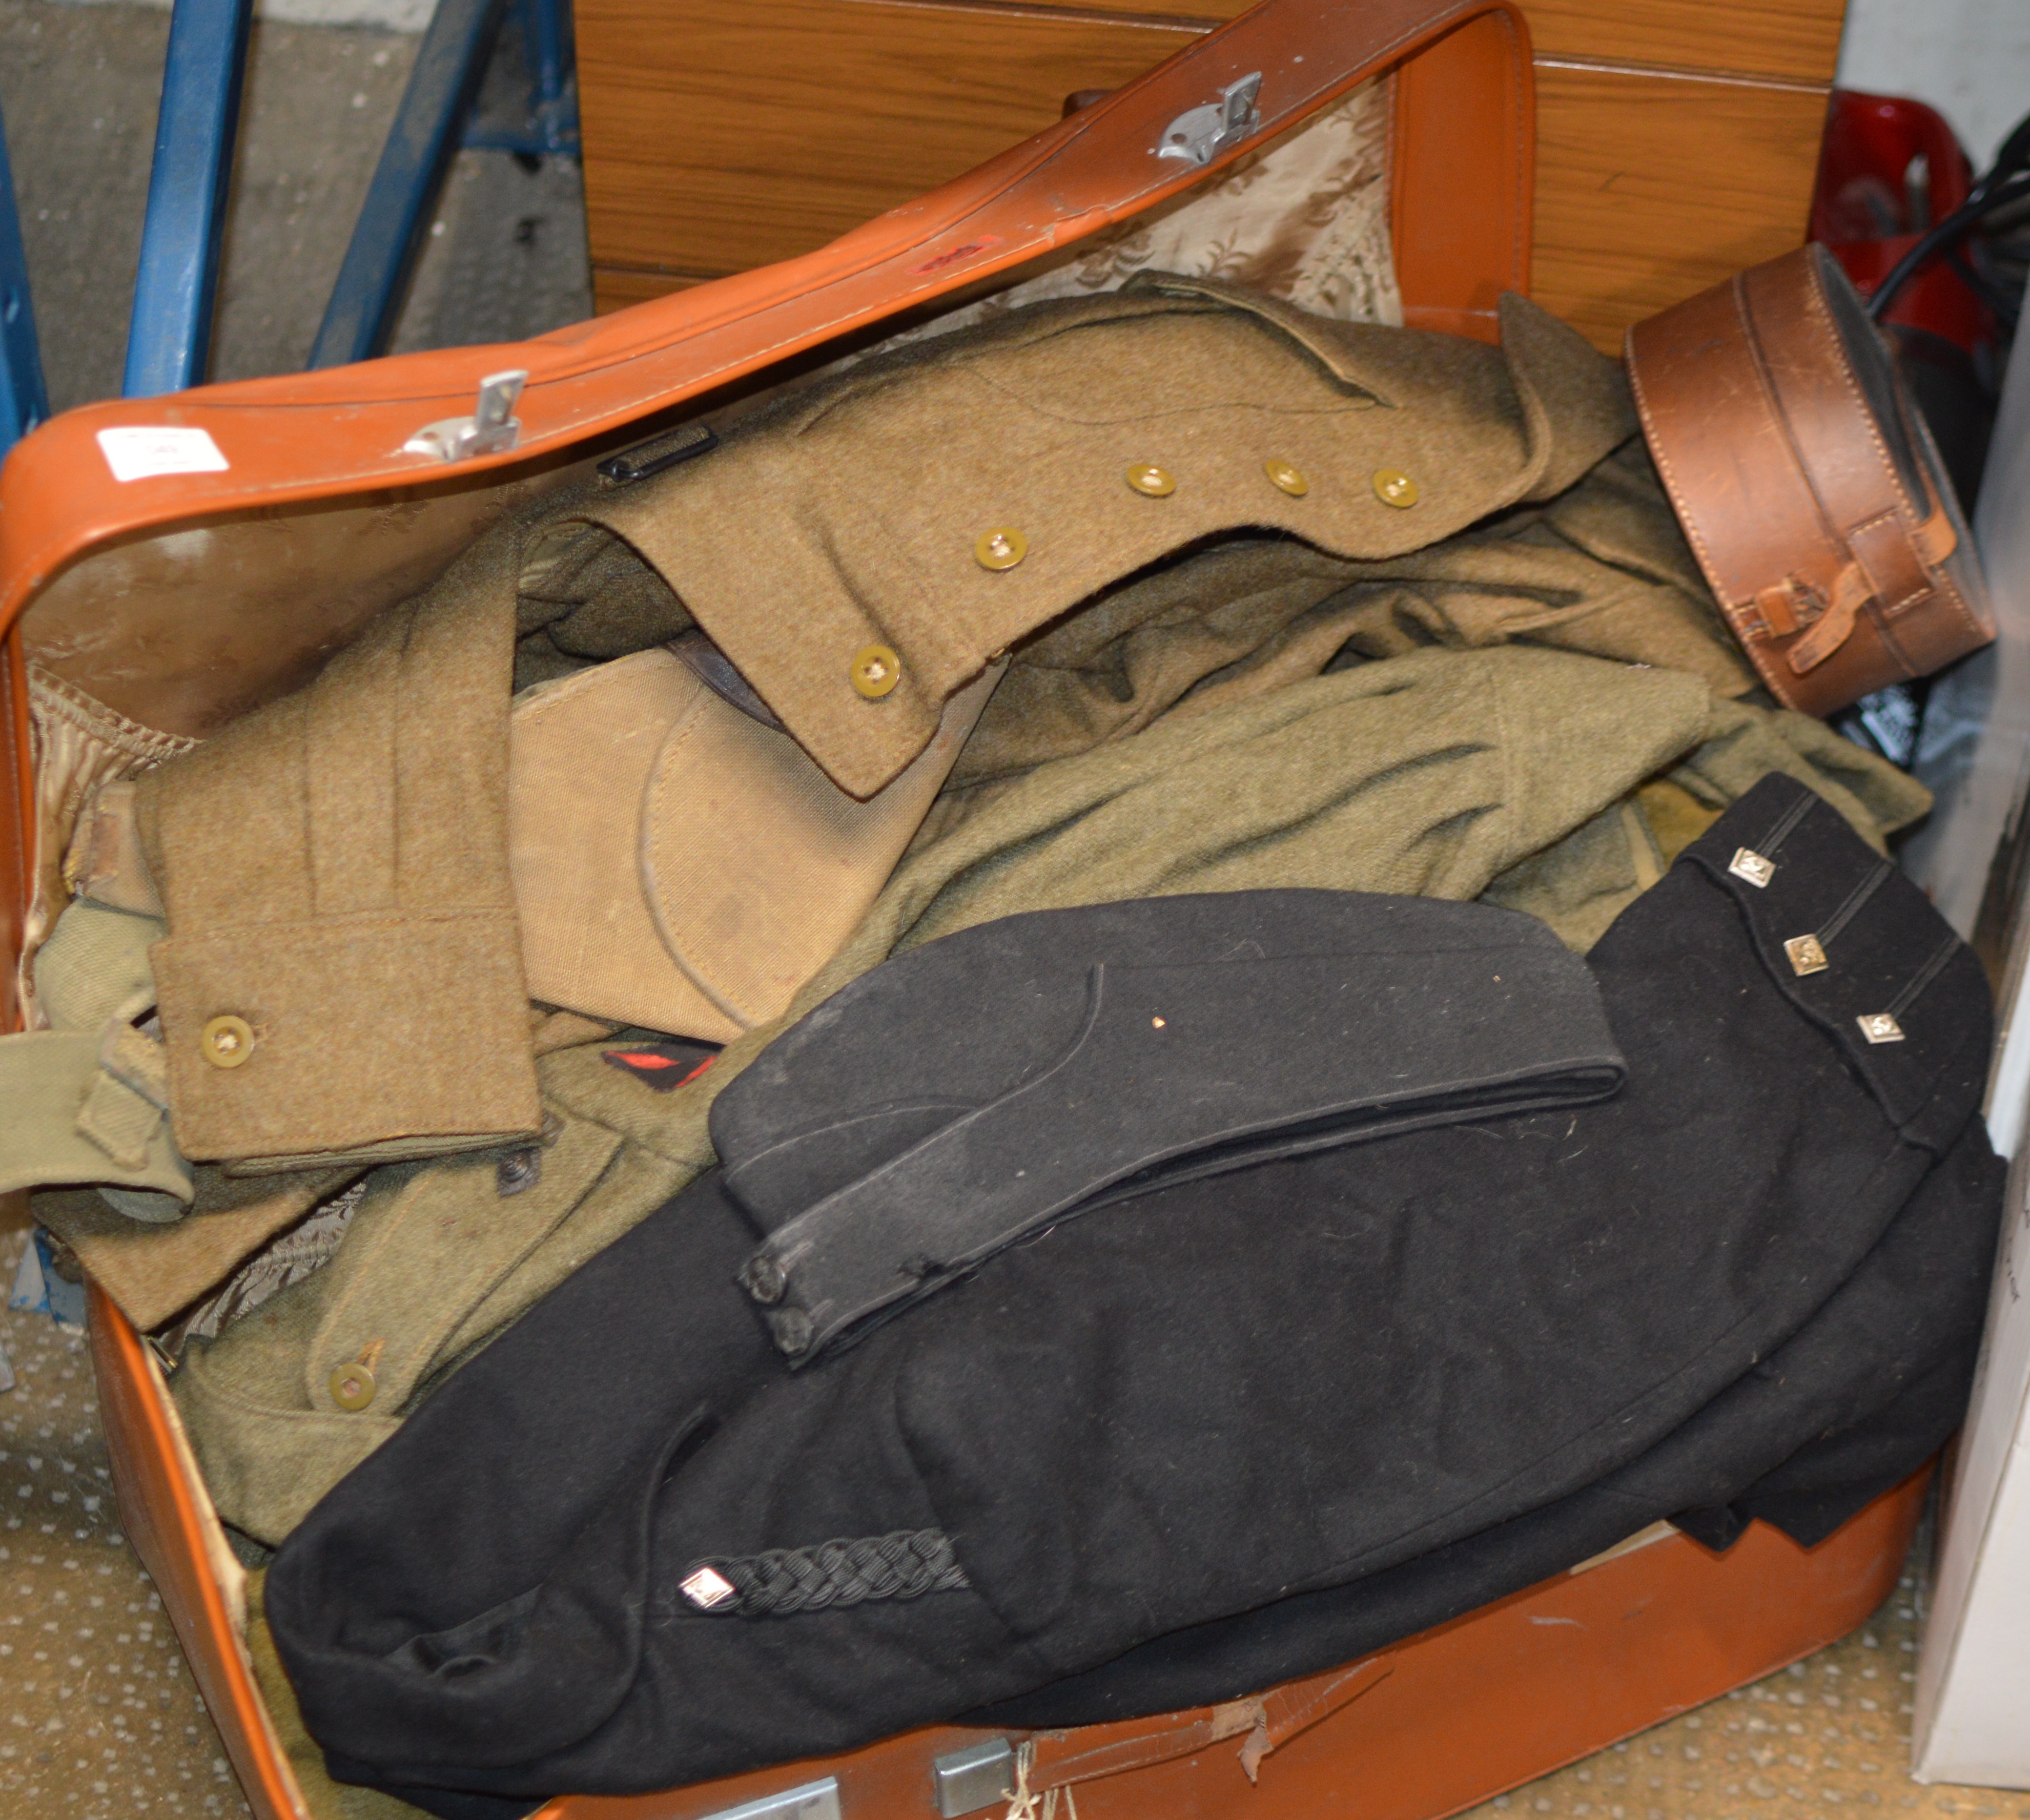 OLD CASE WITH VARIOUS CLOTHING, MILITARY GEAR ETC